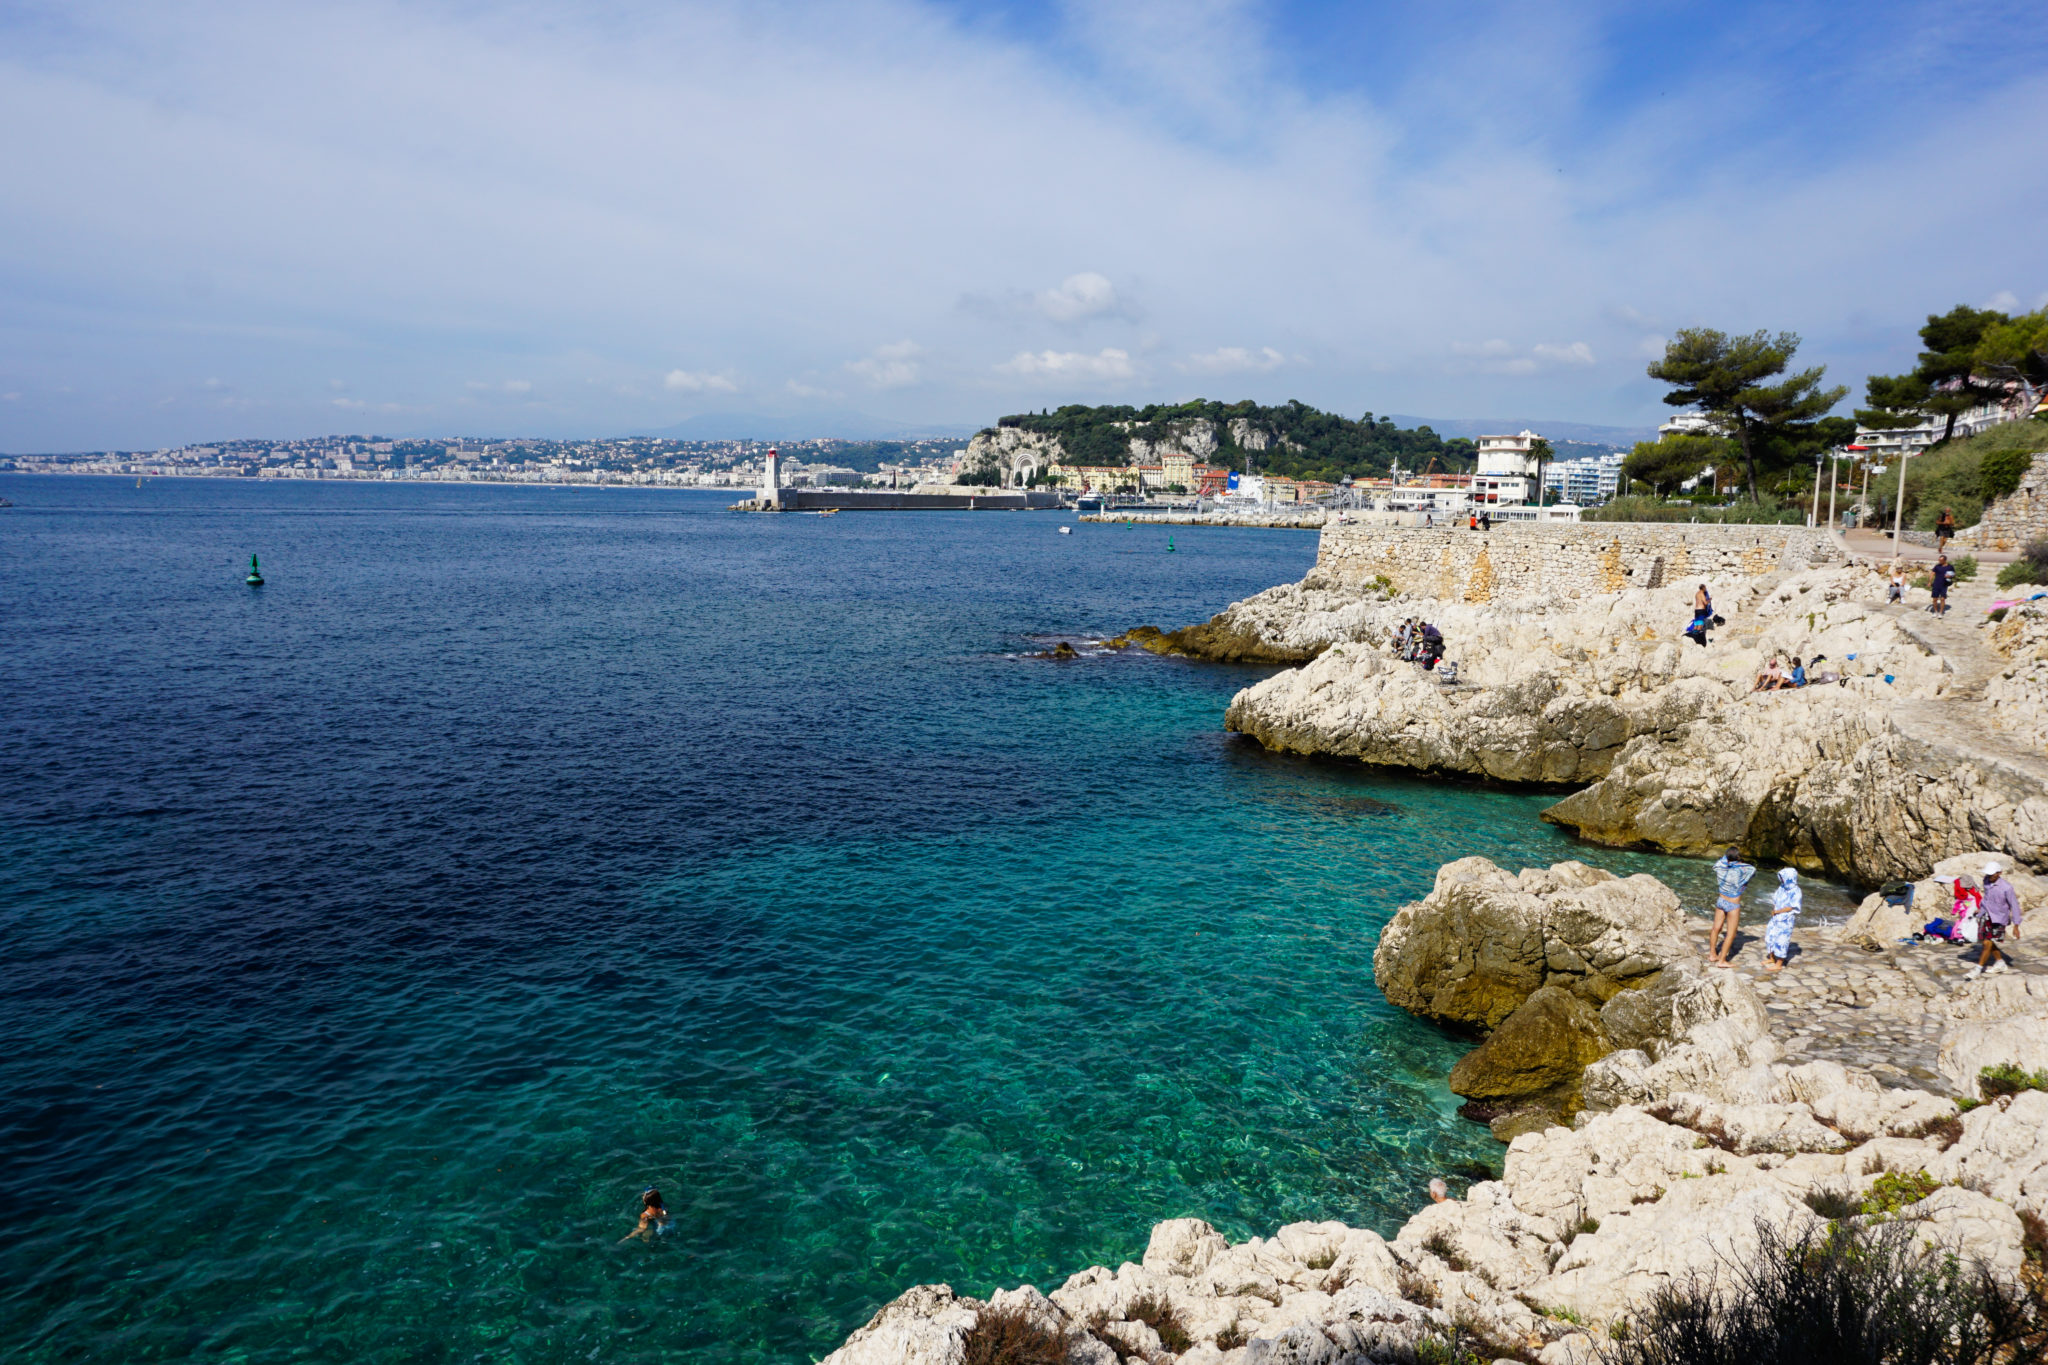 Walking to Villefranche sur Mer from Nice